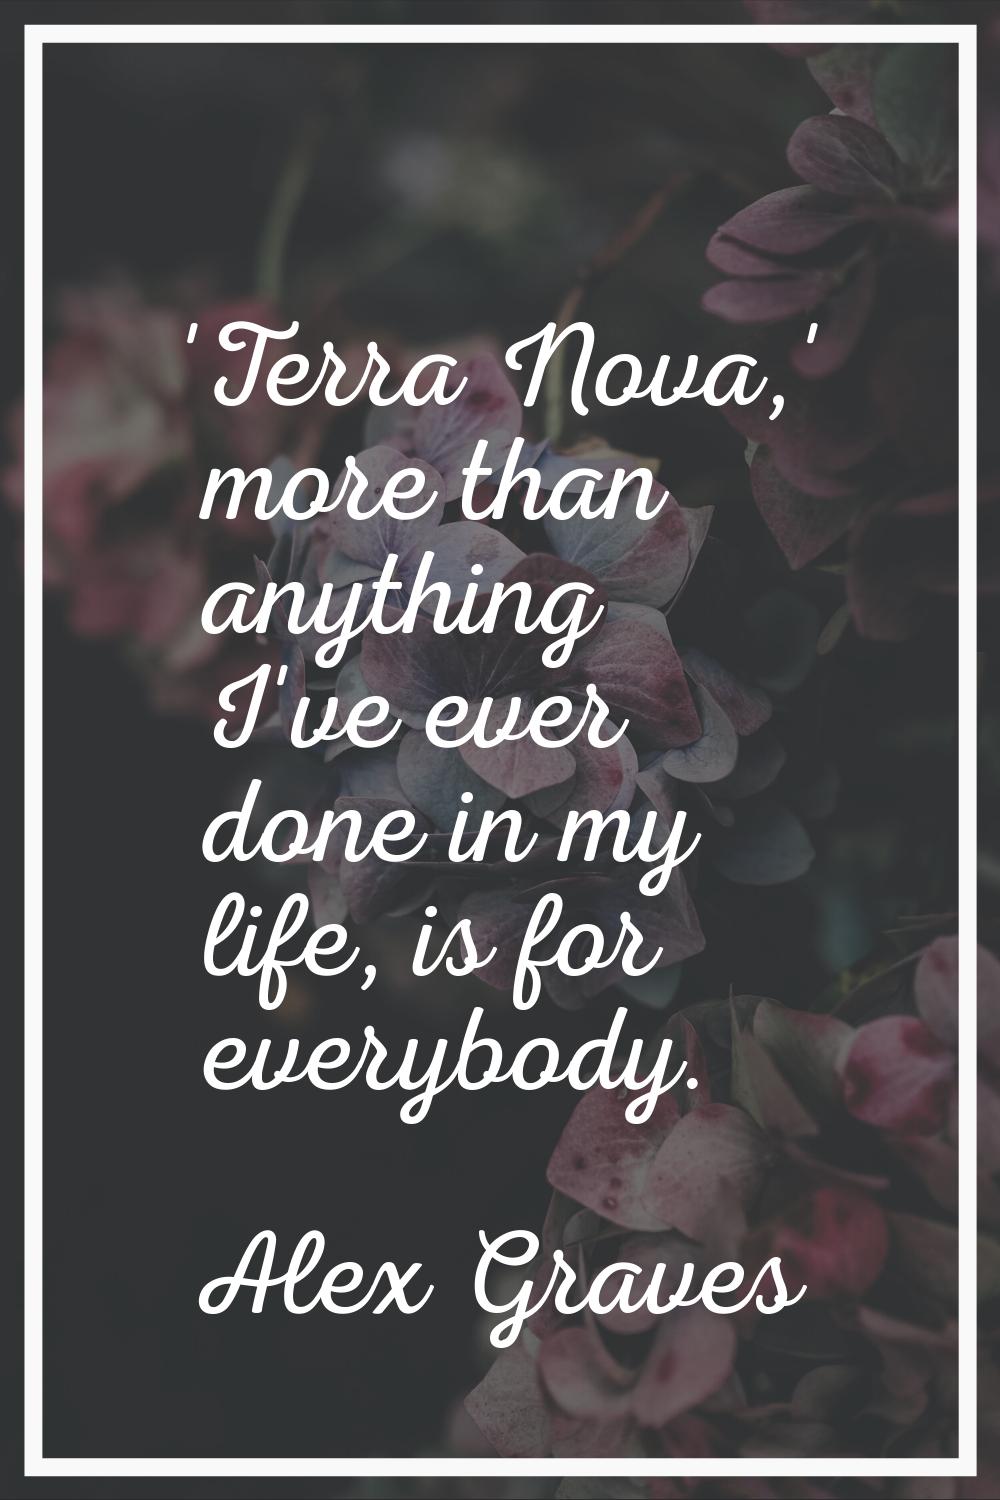 'Terra Nova,' more than anything I've ever done in my life, is for everybody.